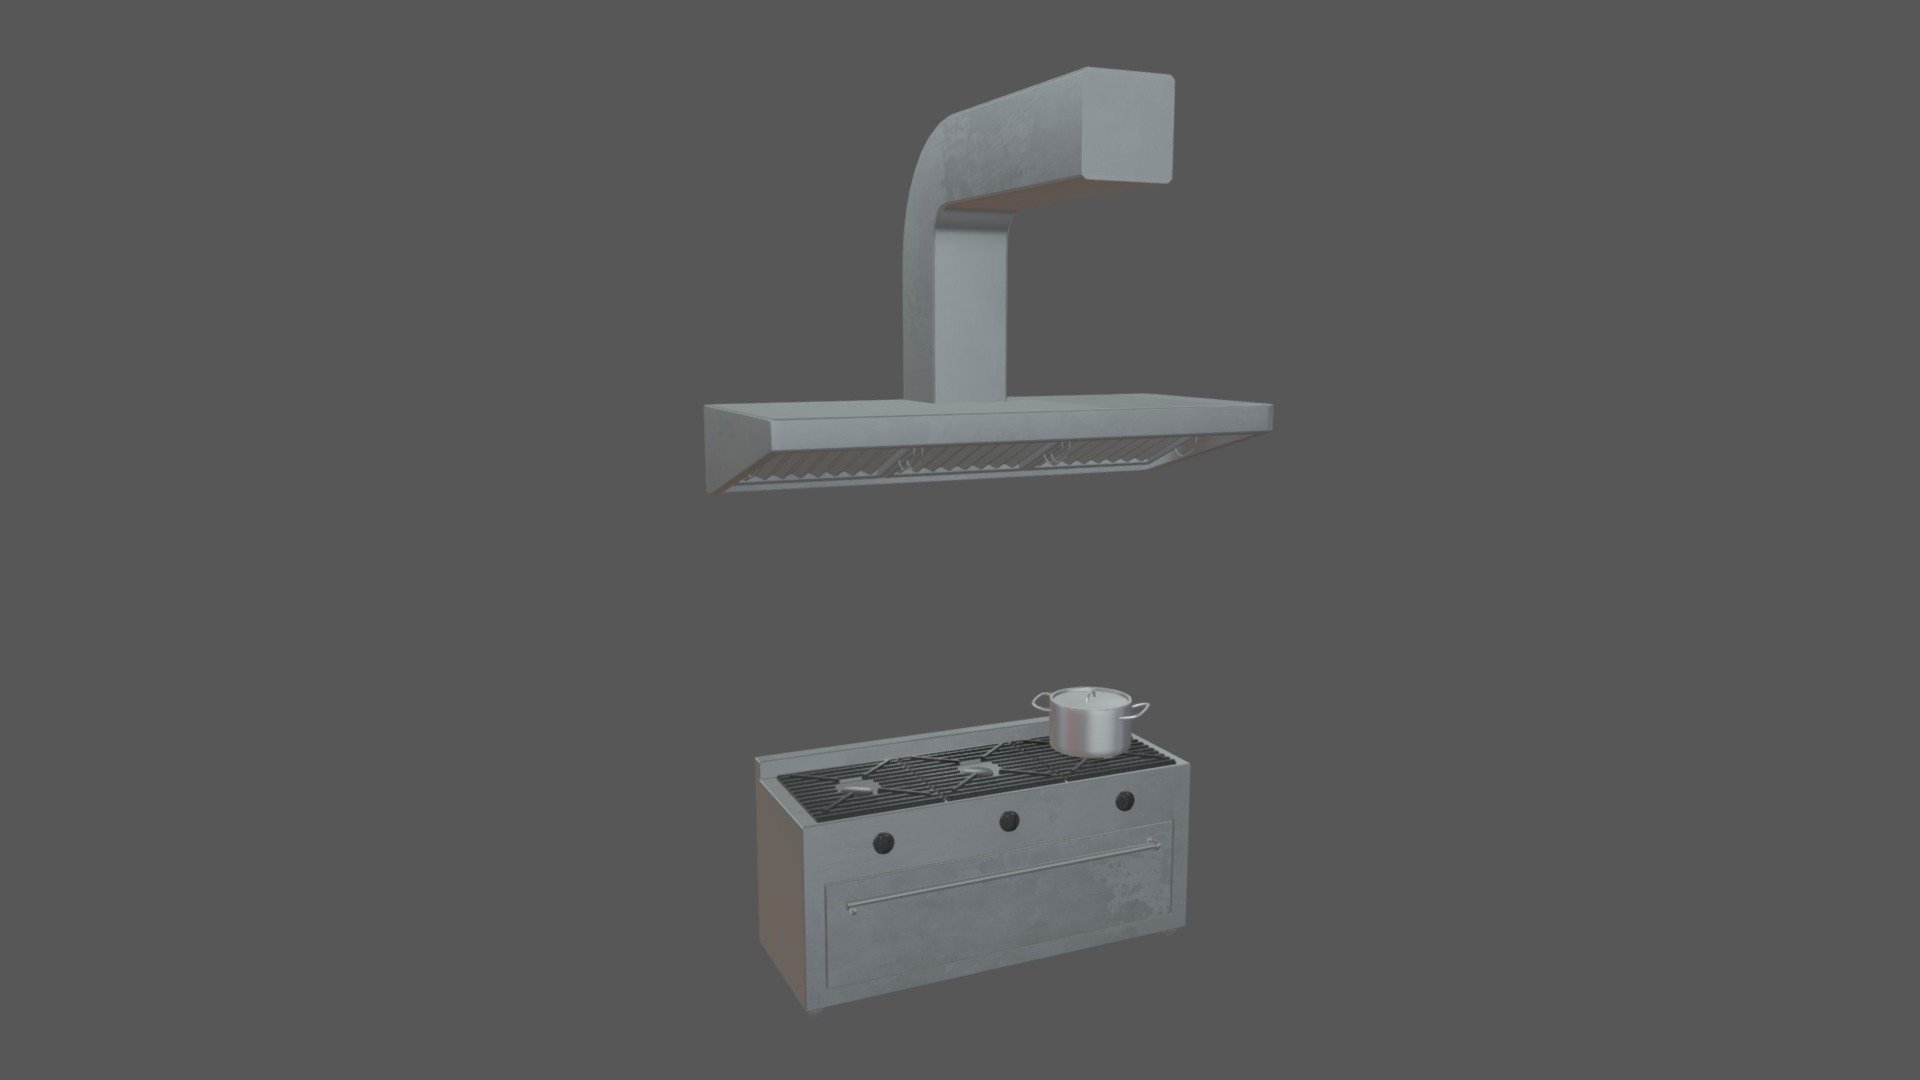 This model contains a Cookware Set 02 from a pack based on a kitchen which i modeled in Maya 2018 and texturized in Substance Painter. These models are perfect to create a Kitchen scene, a house, an office or whatever needed.

The model is separated in different furnitures from the same style. I will add the .obj, .fbx, .blend, .mb, .dae as well as the textures in 2 different uv’s and the Substance Painter file.

This is part of a pack of different office items and kitchen items which are published one by one. Full kitchen scene will be able on my profile, if you don’t finde it contact me.

If you need any kind of help contact me, i will help you with everything i can. If you like the model please give me some feedback, I would appreciate it.

If you experience any kind of difficulties, be sure to contact me and i will help you. Sincerely Yours, ViperJr3D - Cookware Set 02 - Buy Royalty Free 3D model by ViperJr3D 3d model